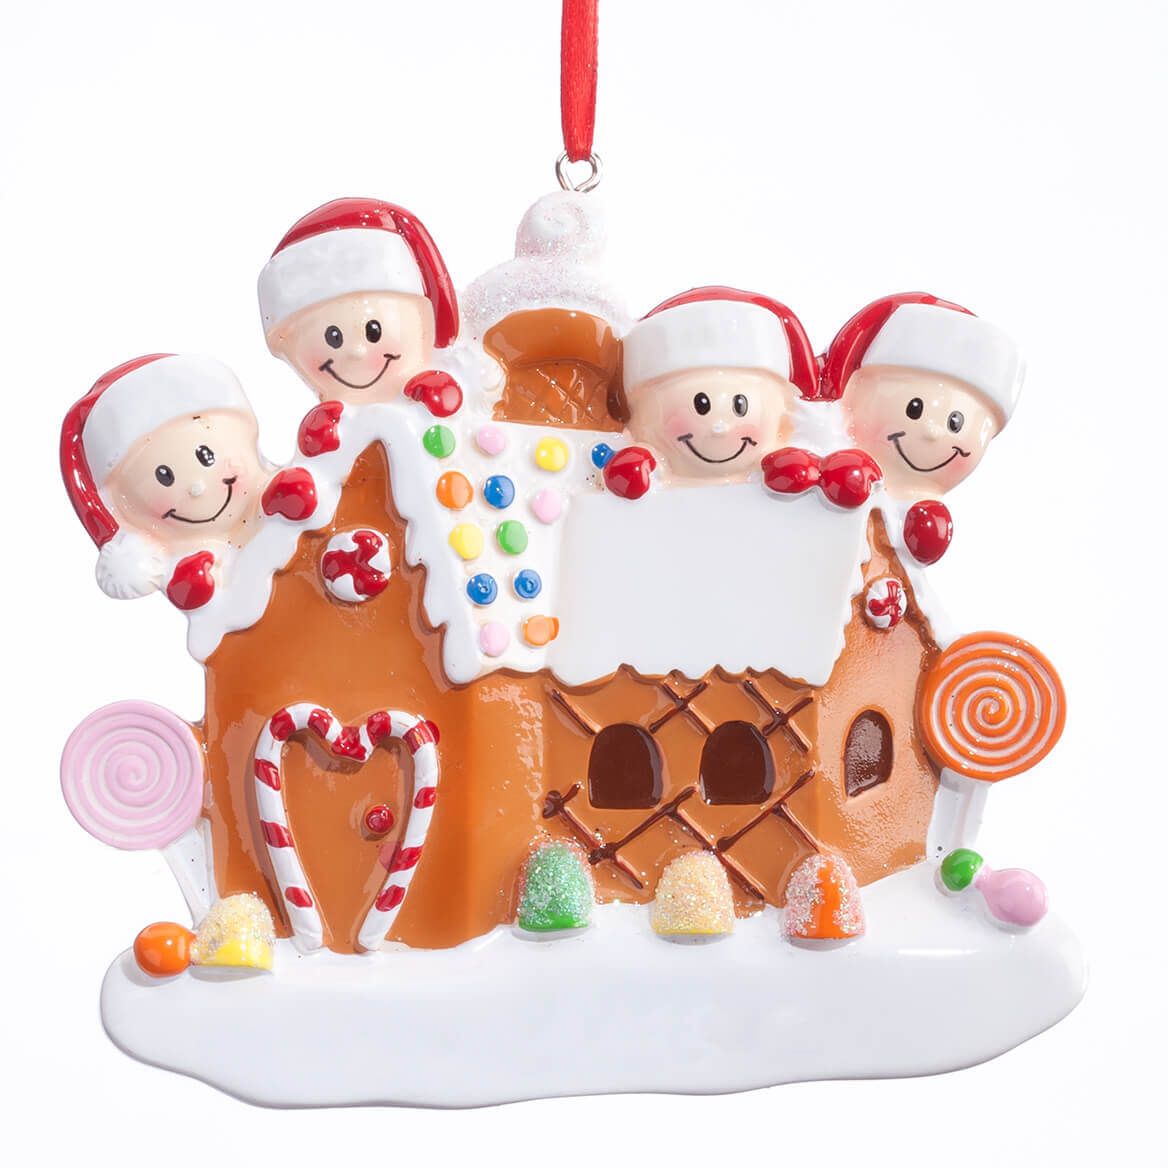 Gingerbread Family Ornament, Family of 4 + '-' + 360953